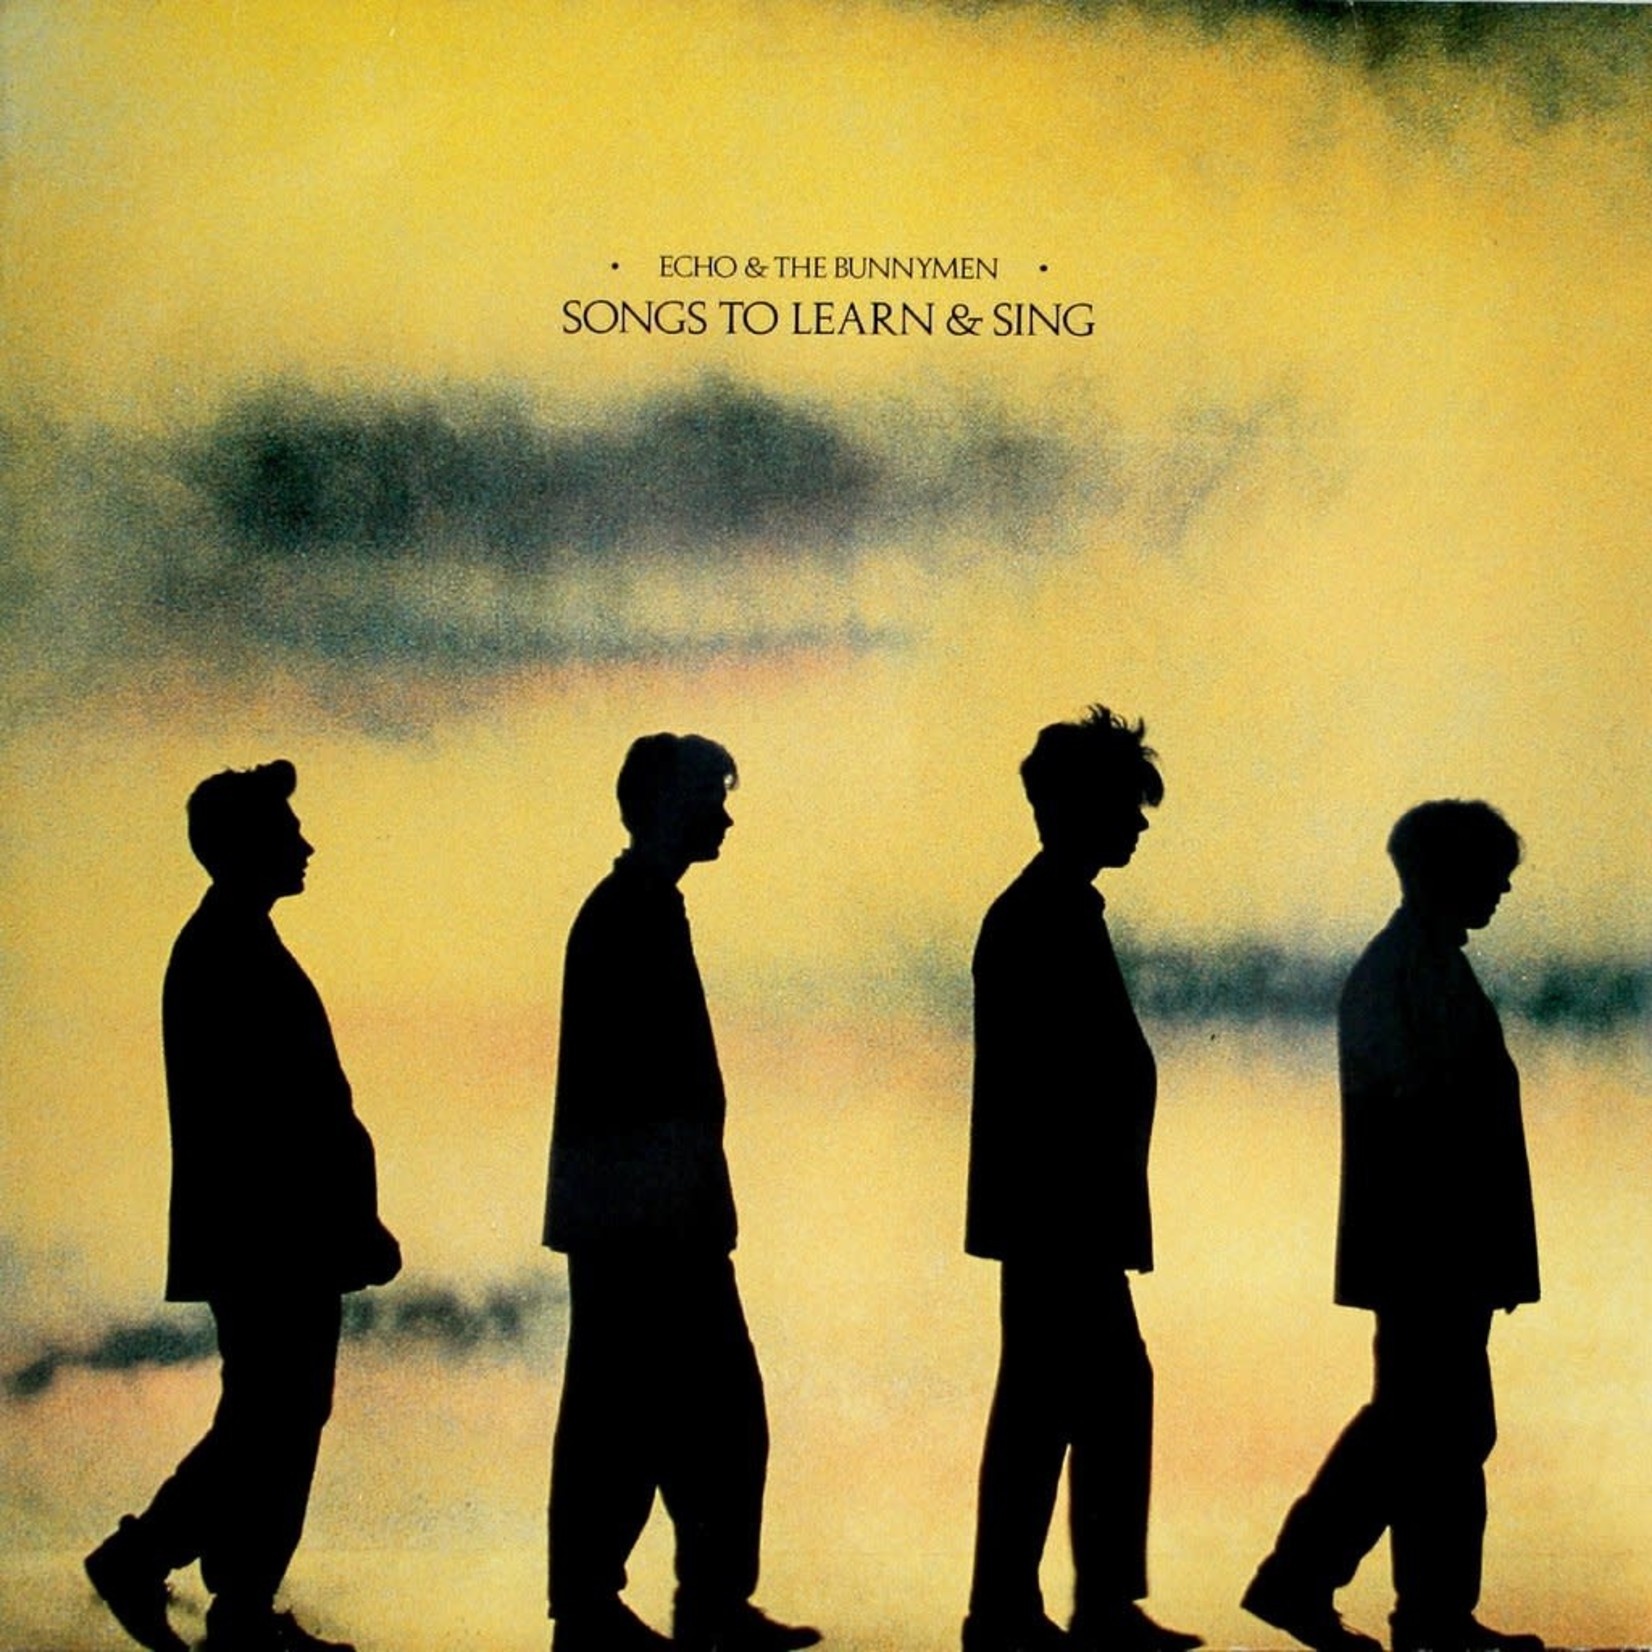 [New] Echo & the Bunnymen - Songs To Learn & Sing